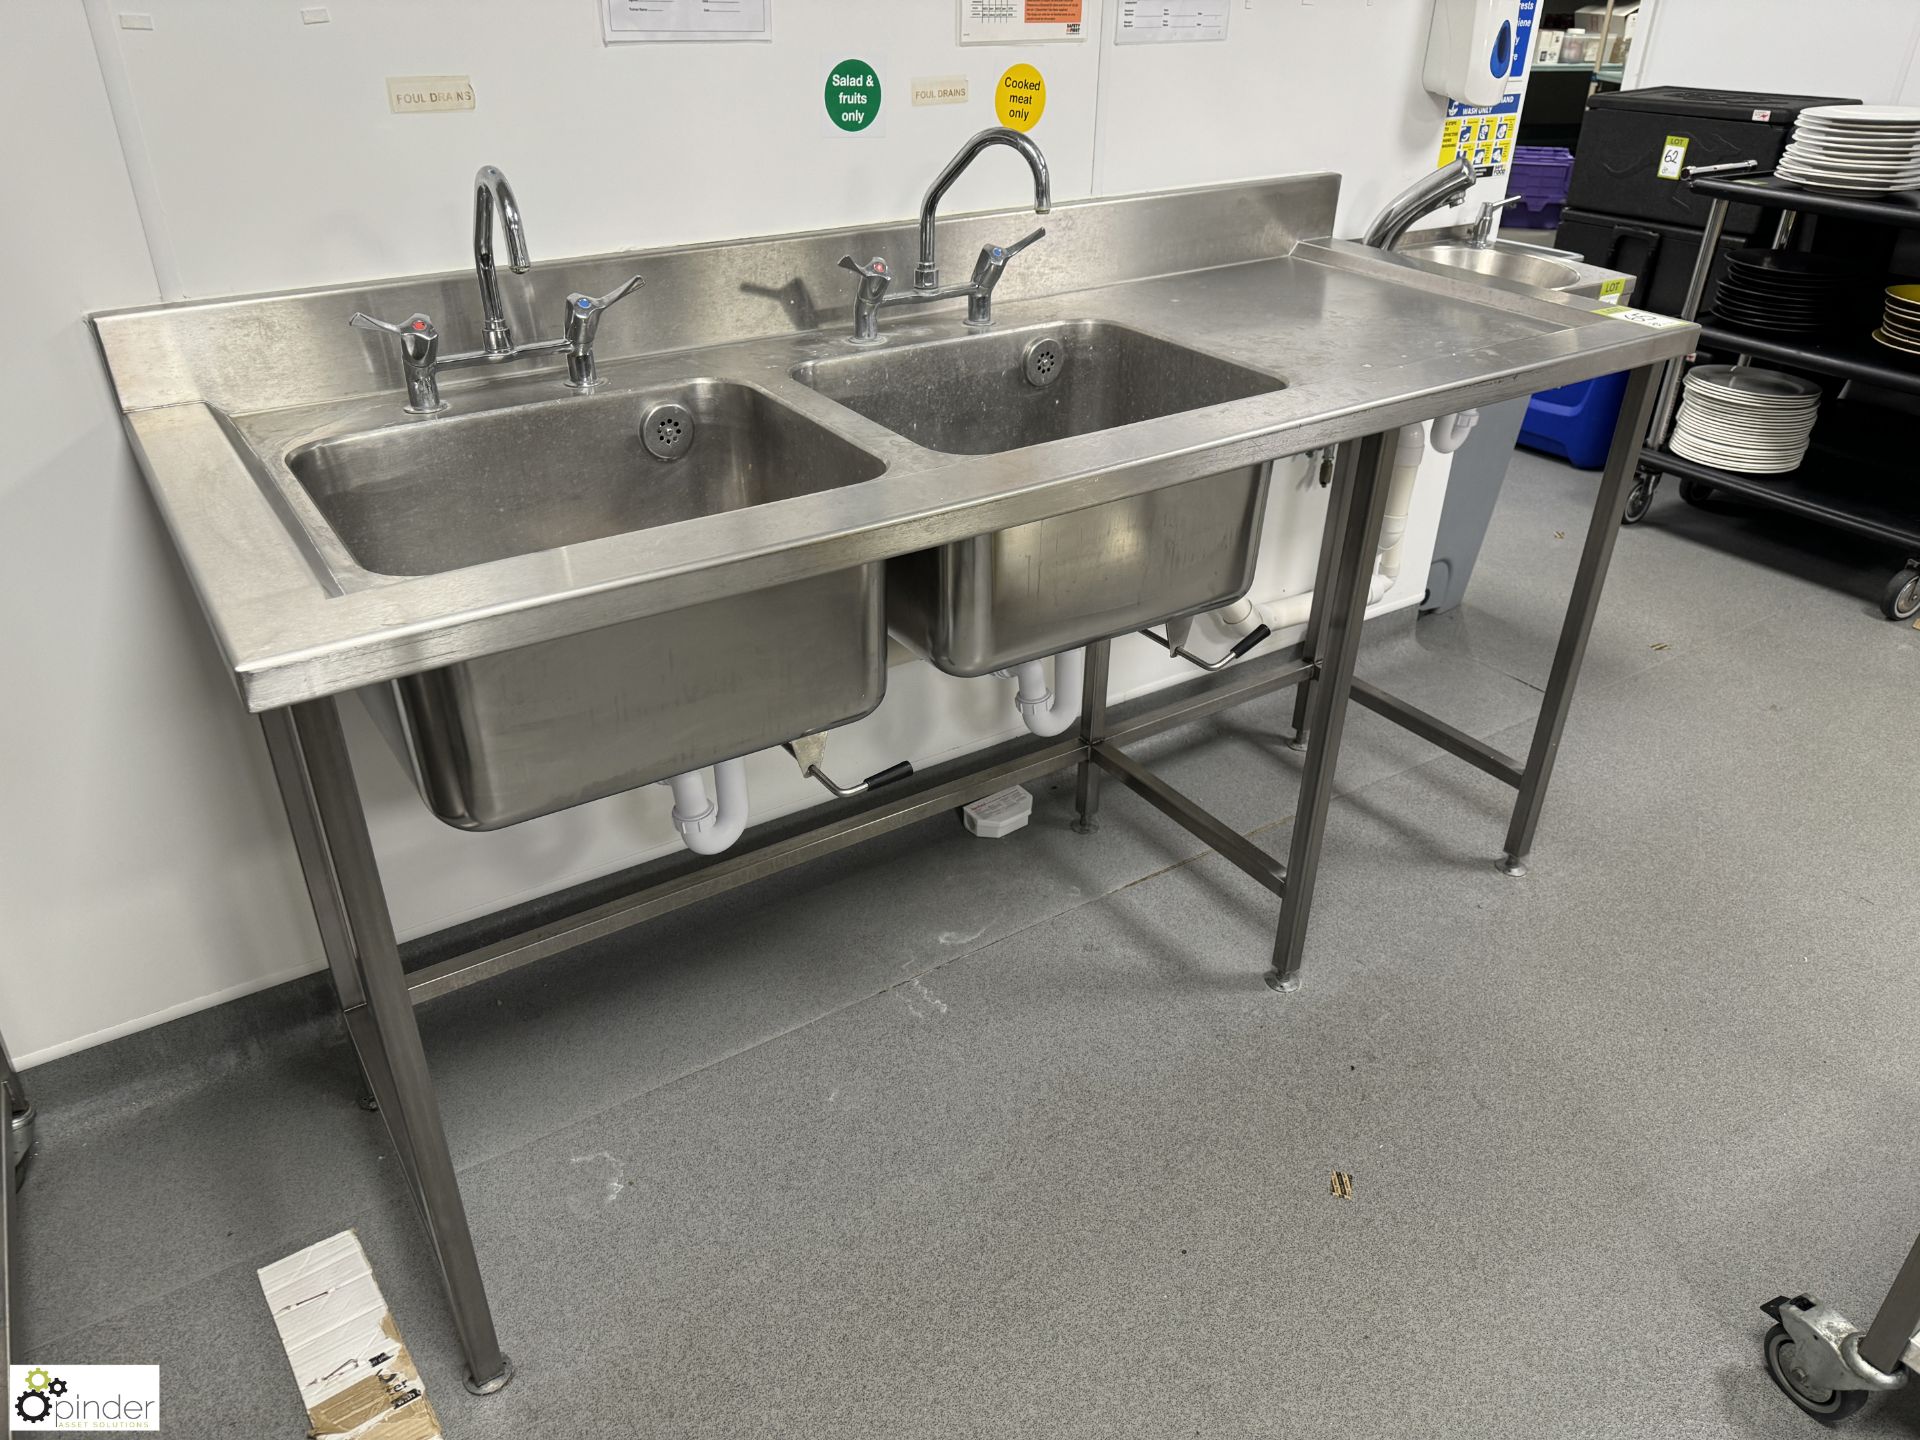 Stainless steel twin bowl Sink, 1800mm x 700mm x 900mm (location in building – basement kitchen 2) - Image 2 of 4